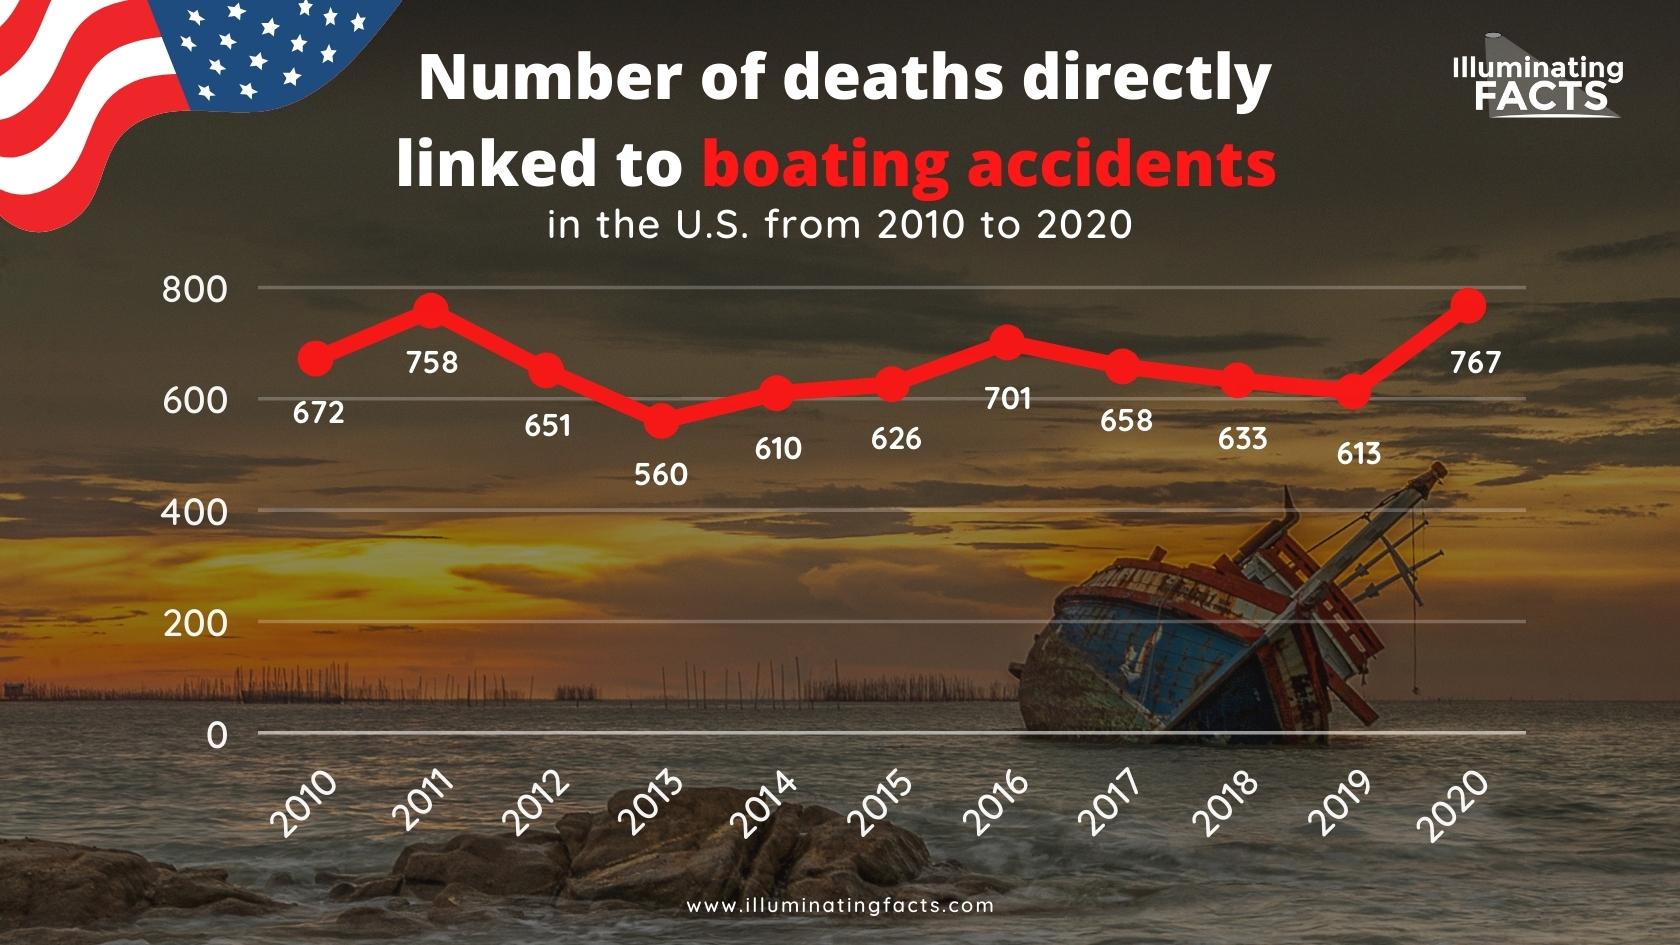 Number of deaths directly linked to boating accidents